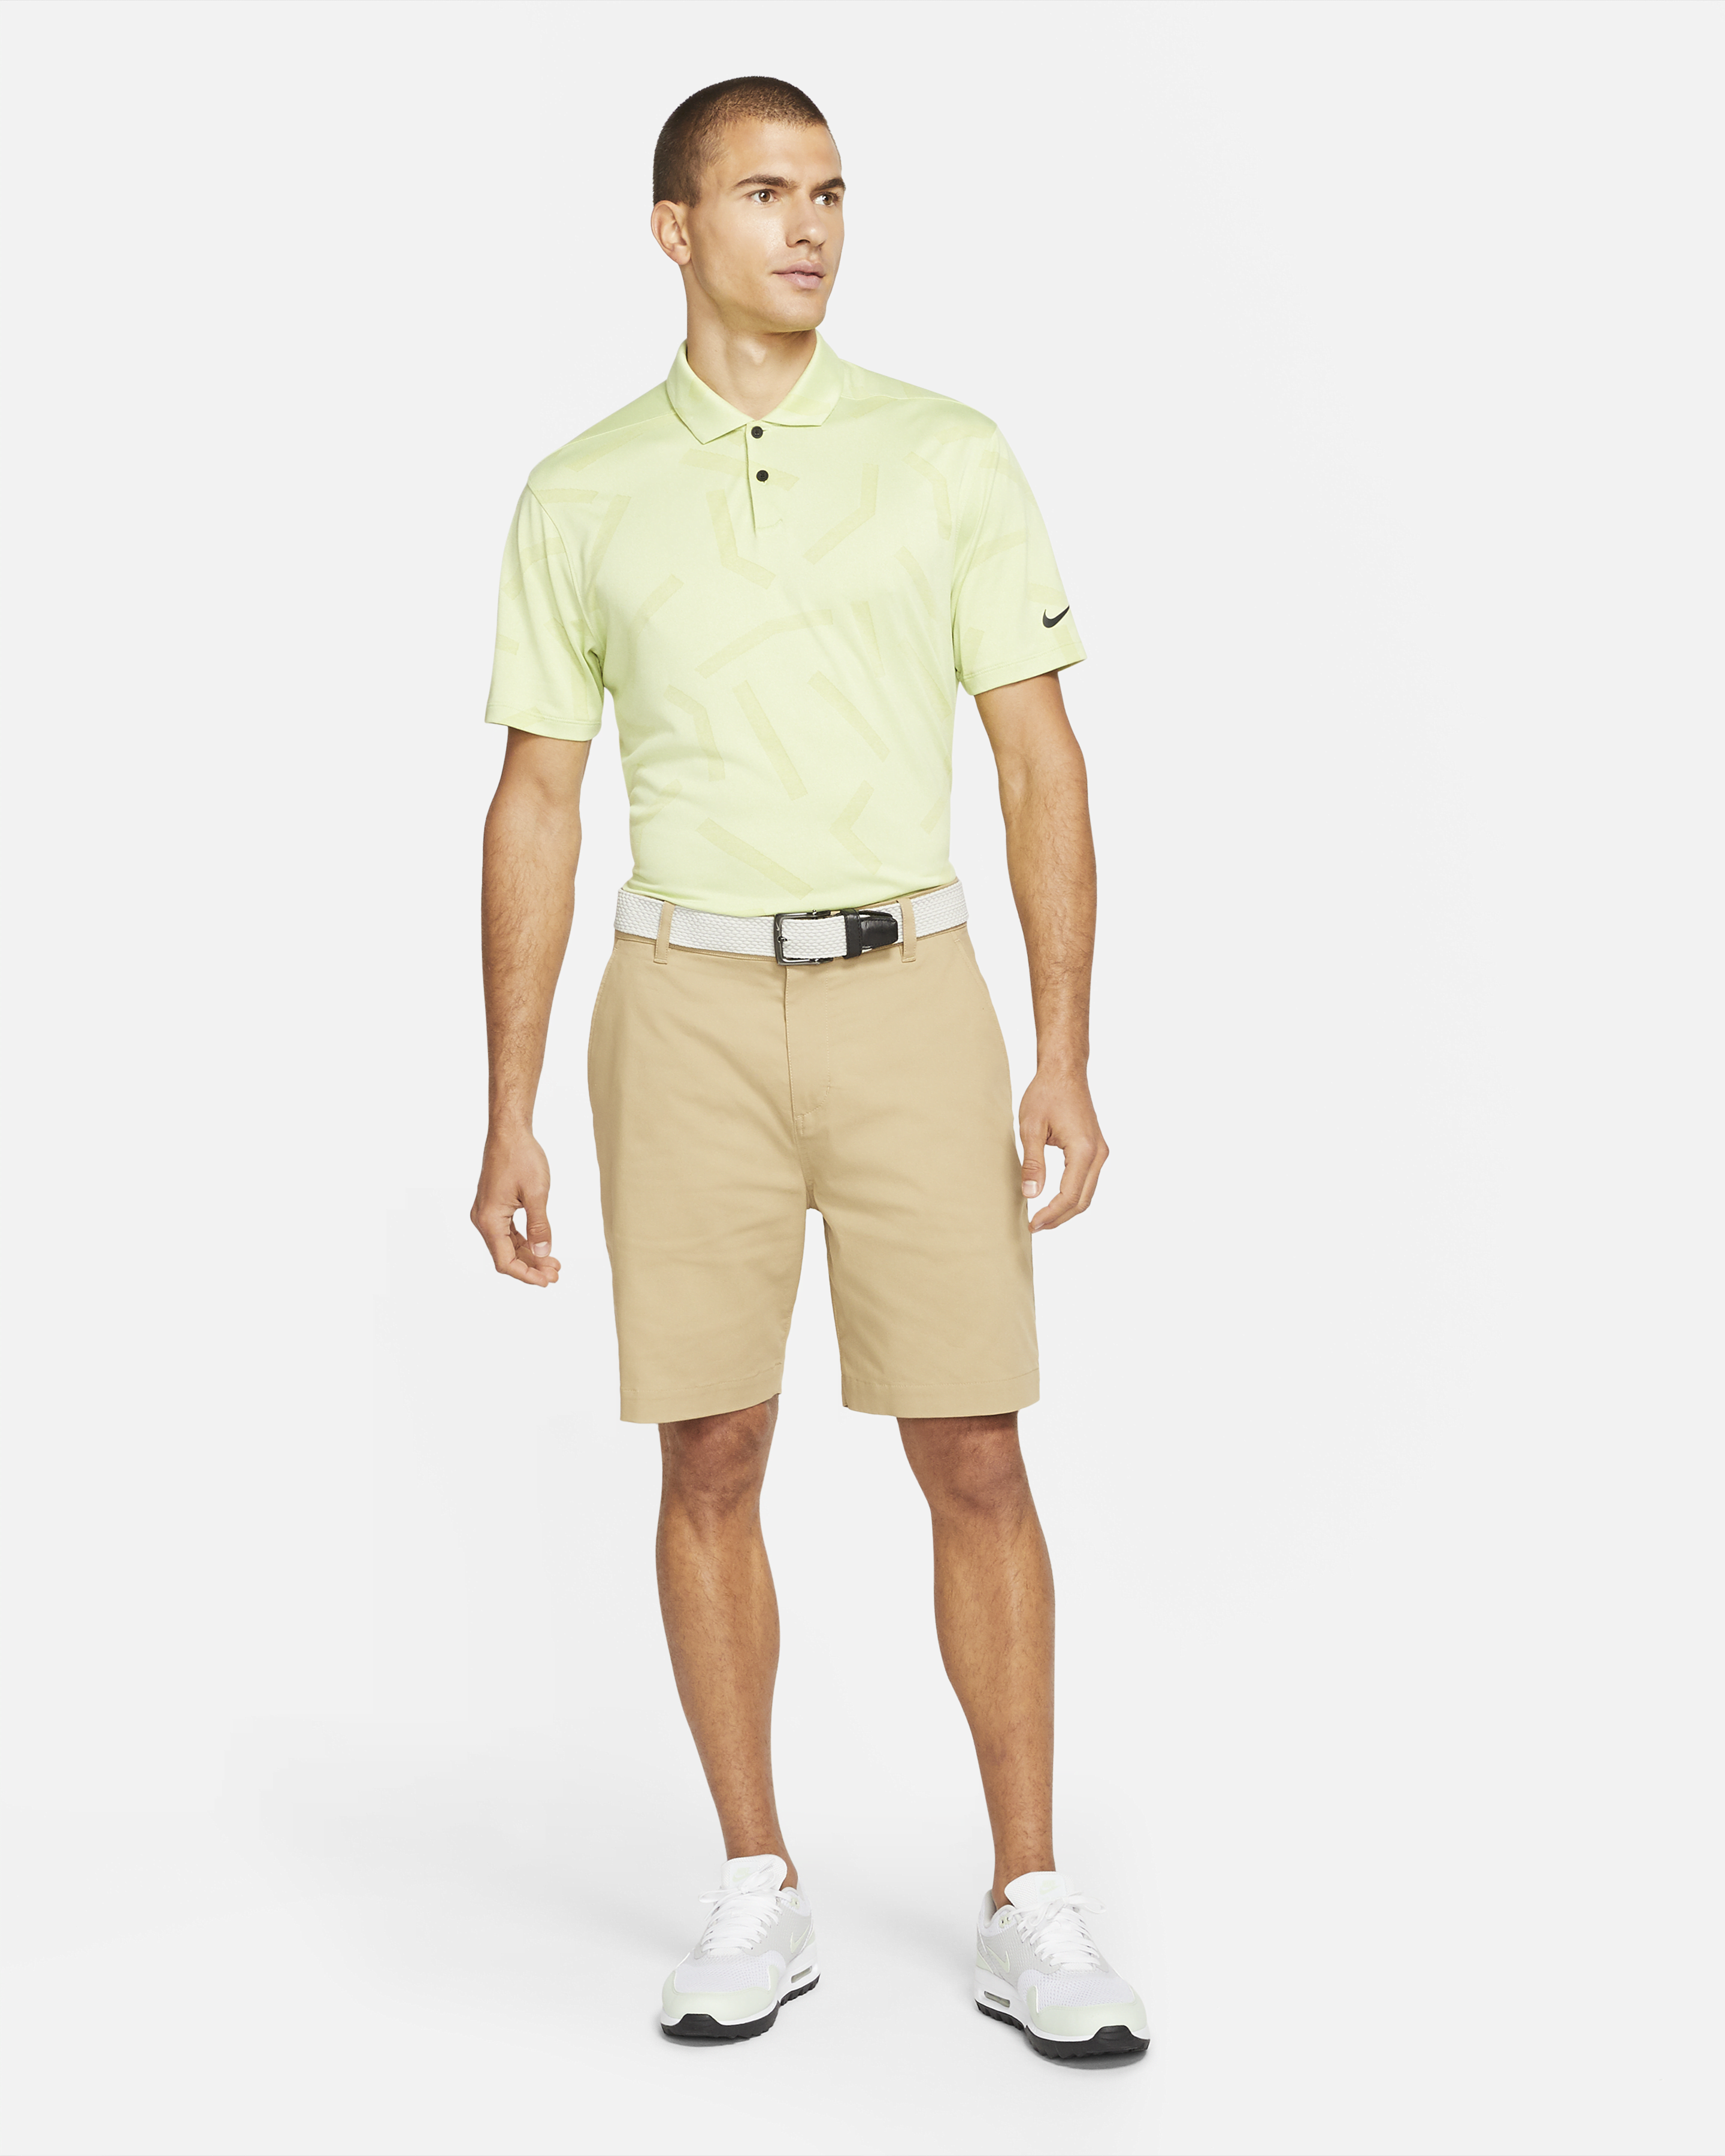 Best Men's Golf Shorts 2022: Nike, Adidas, Under Armour and more